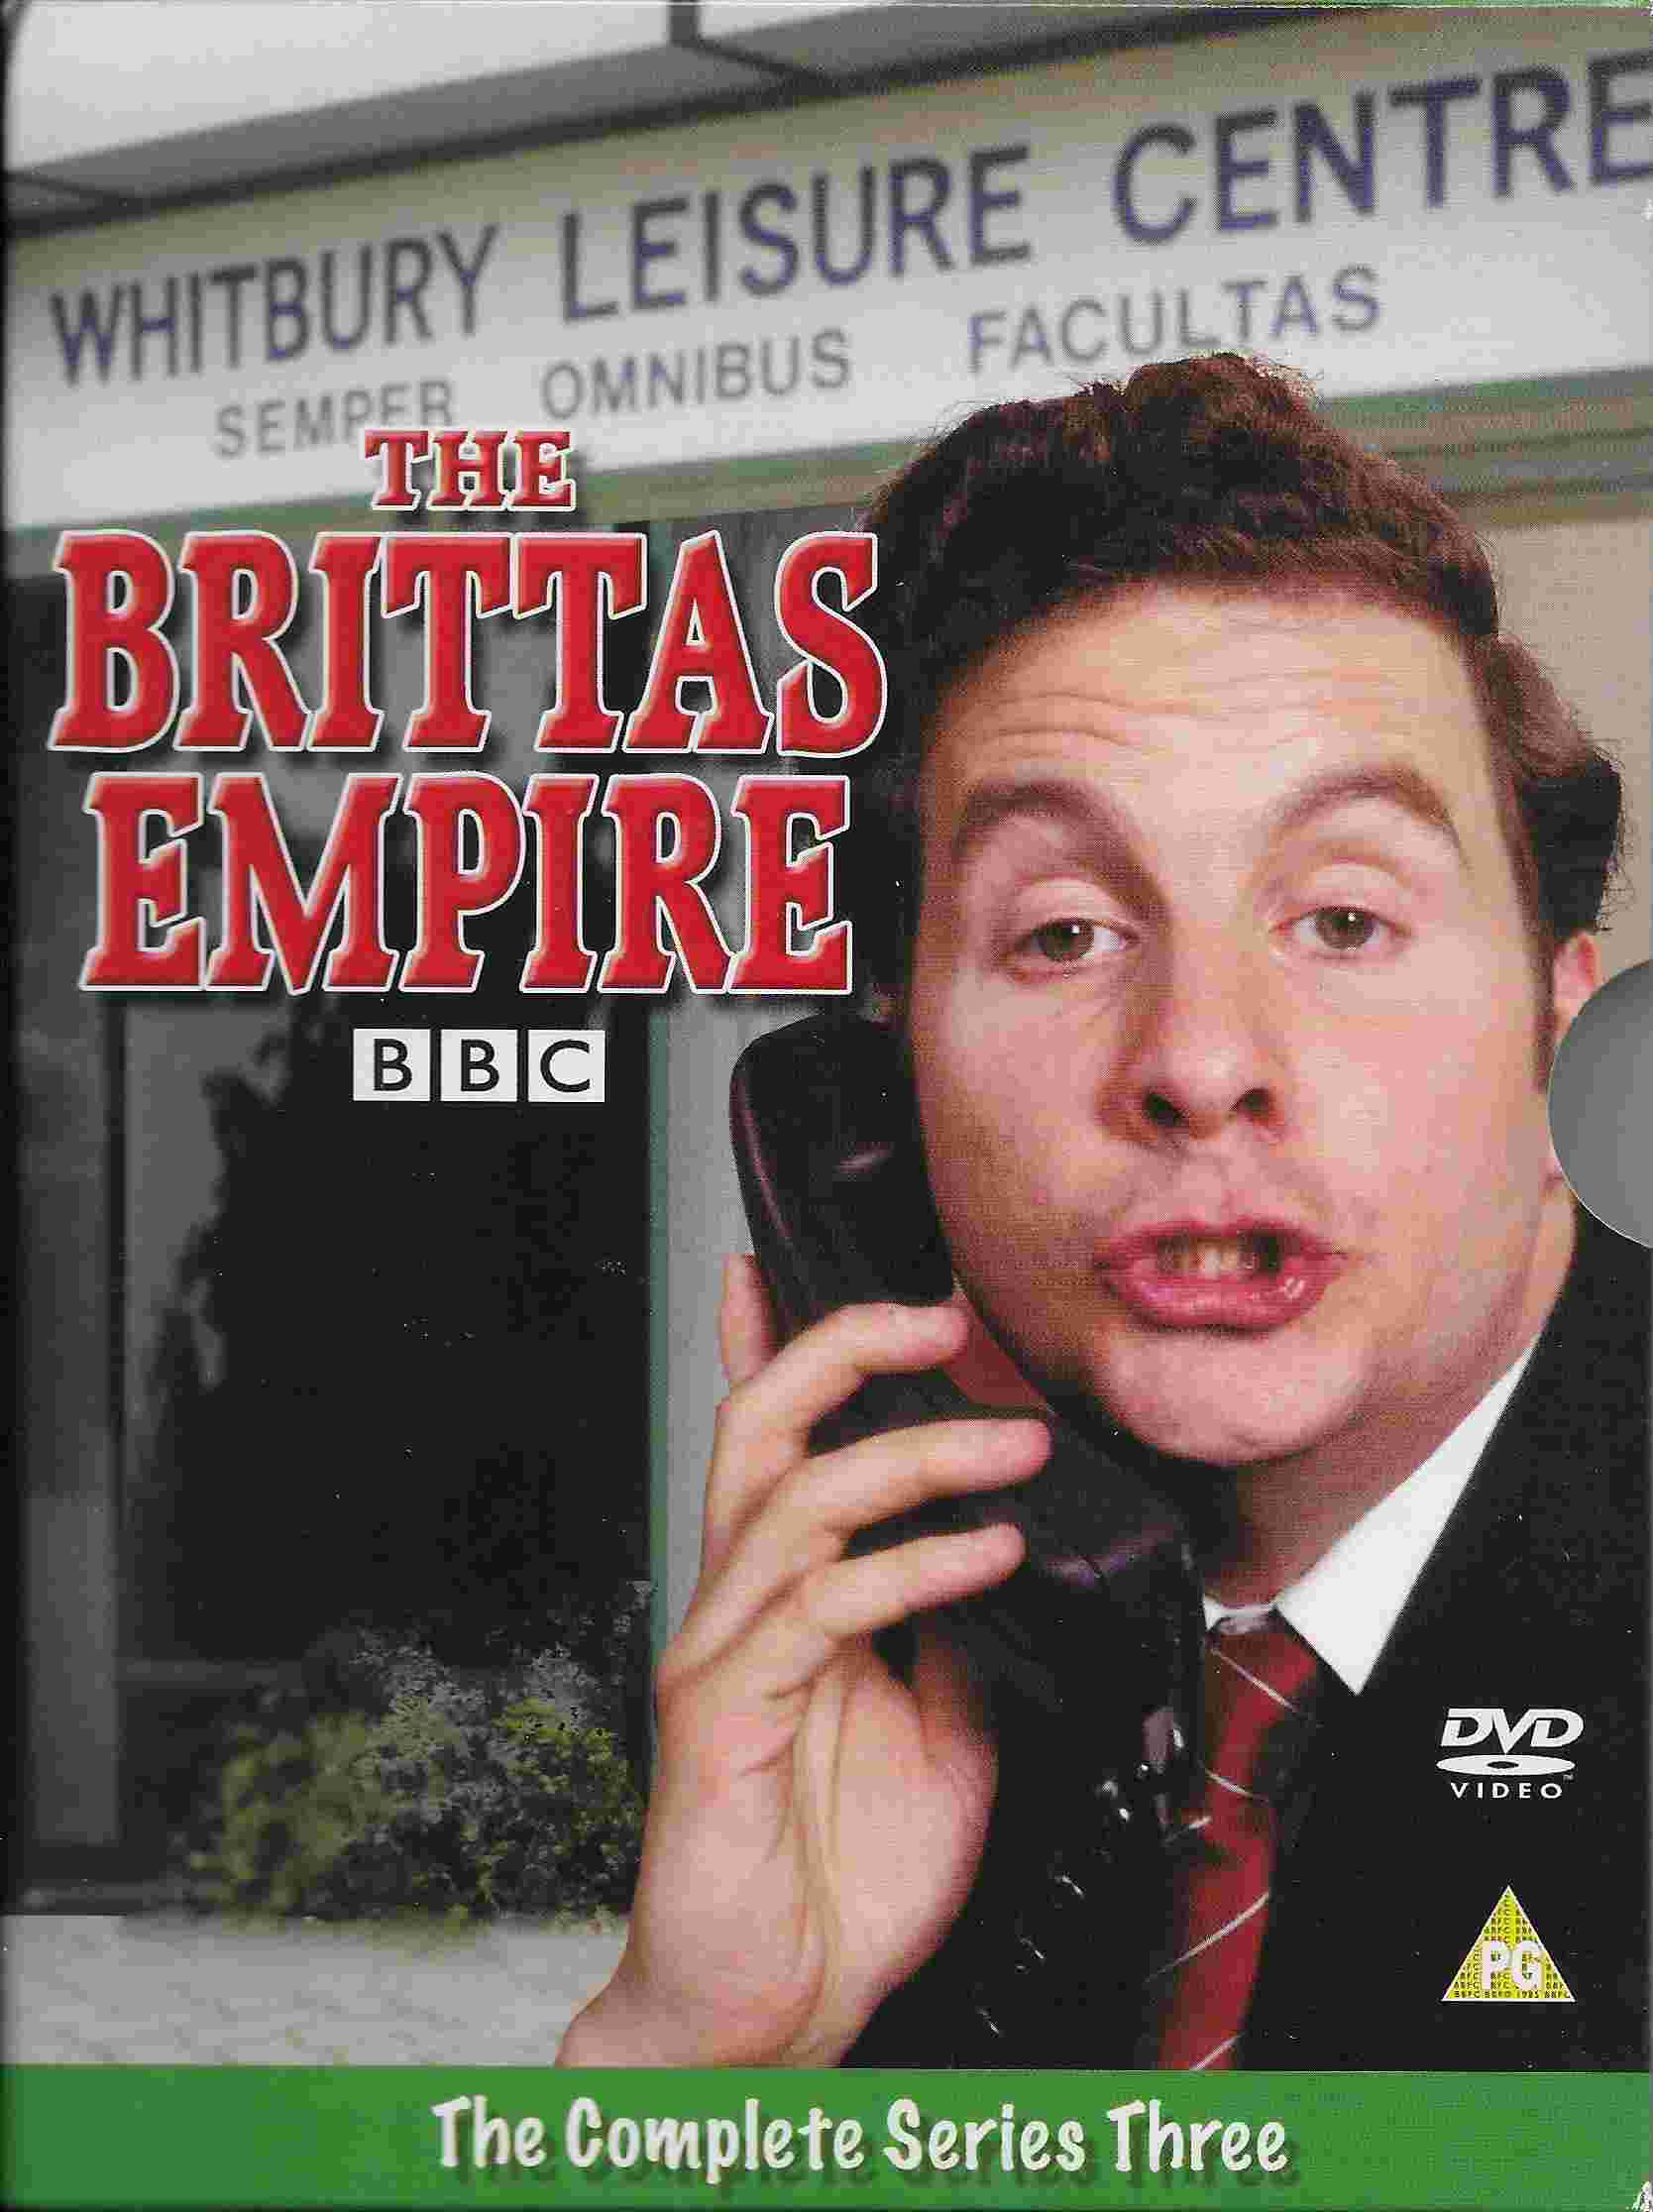 Picture of EKA 50013 The Brittas empire - Series 3 by artist Richard Fegen / Andrew Norriss from the BBC dvds - Records and Tapes library